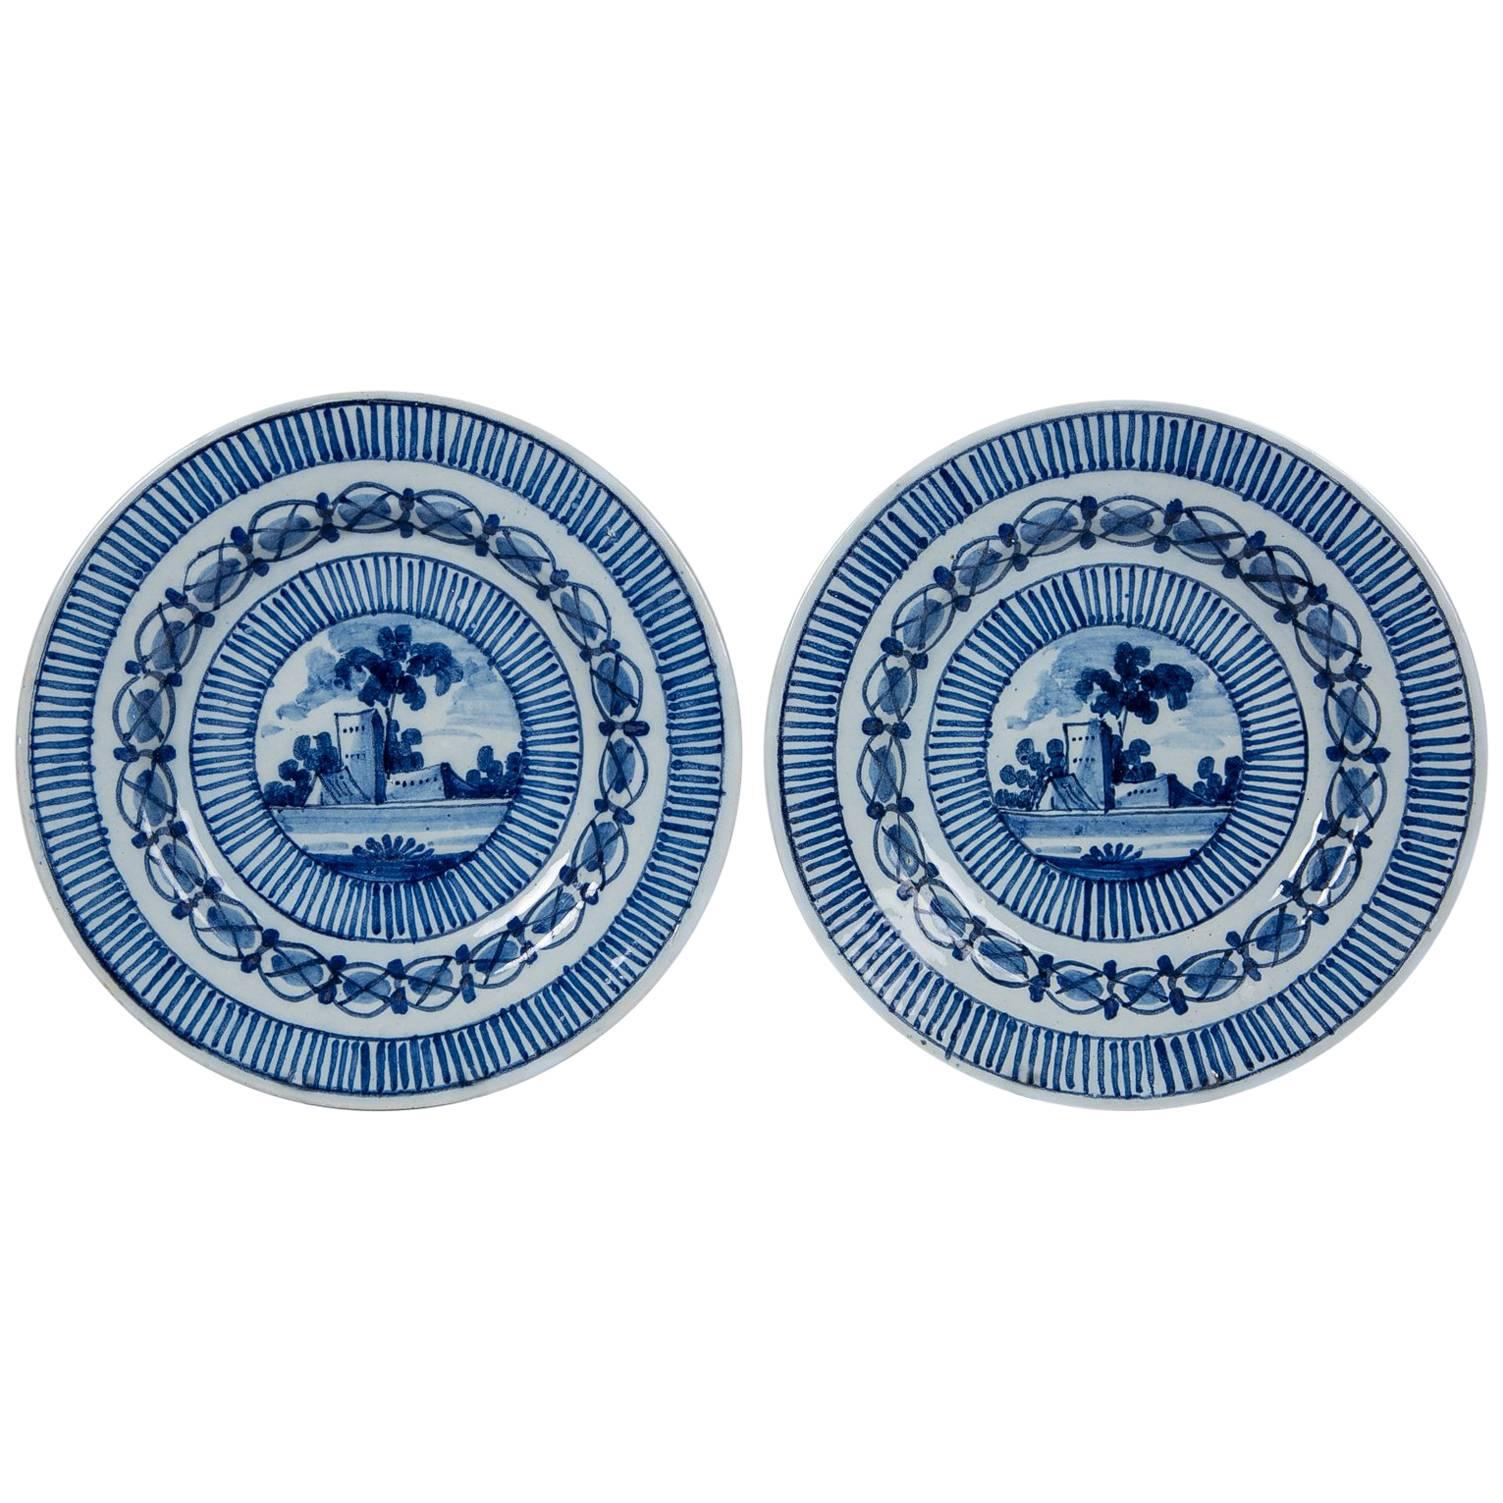 Pair of Blue and White Delft Plates